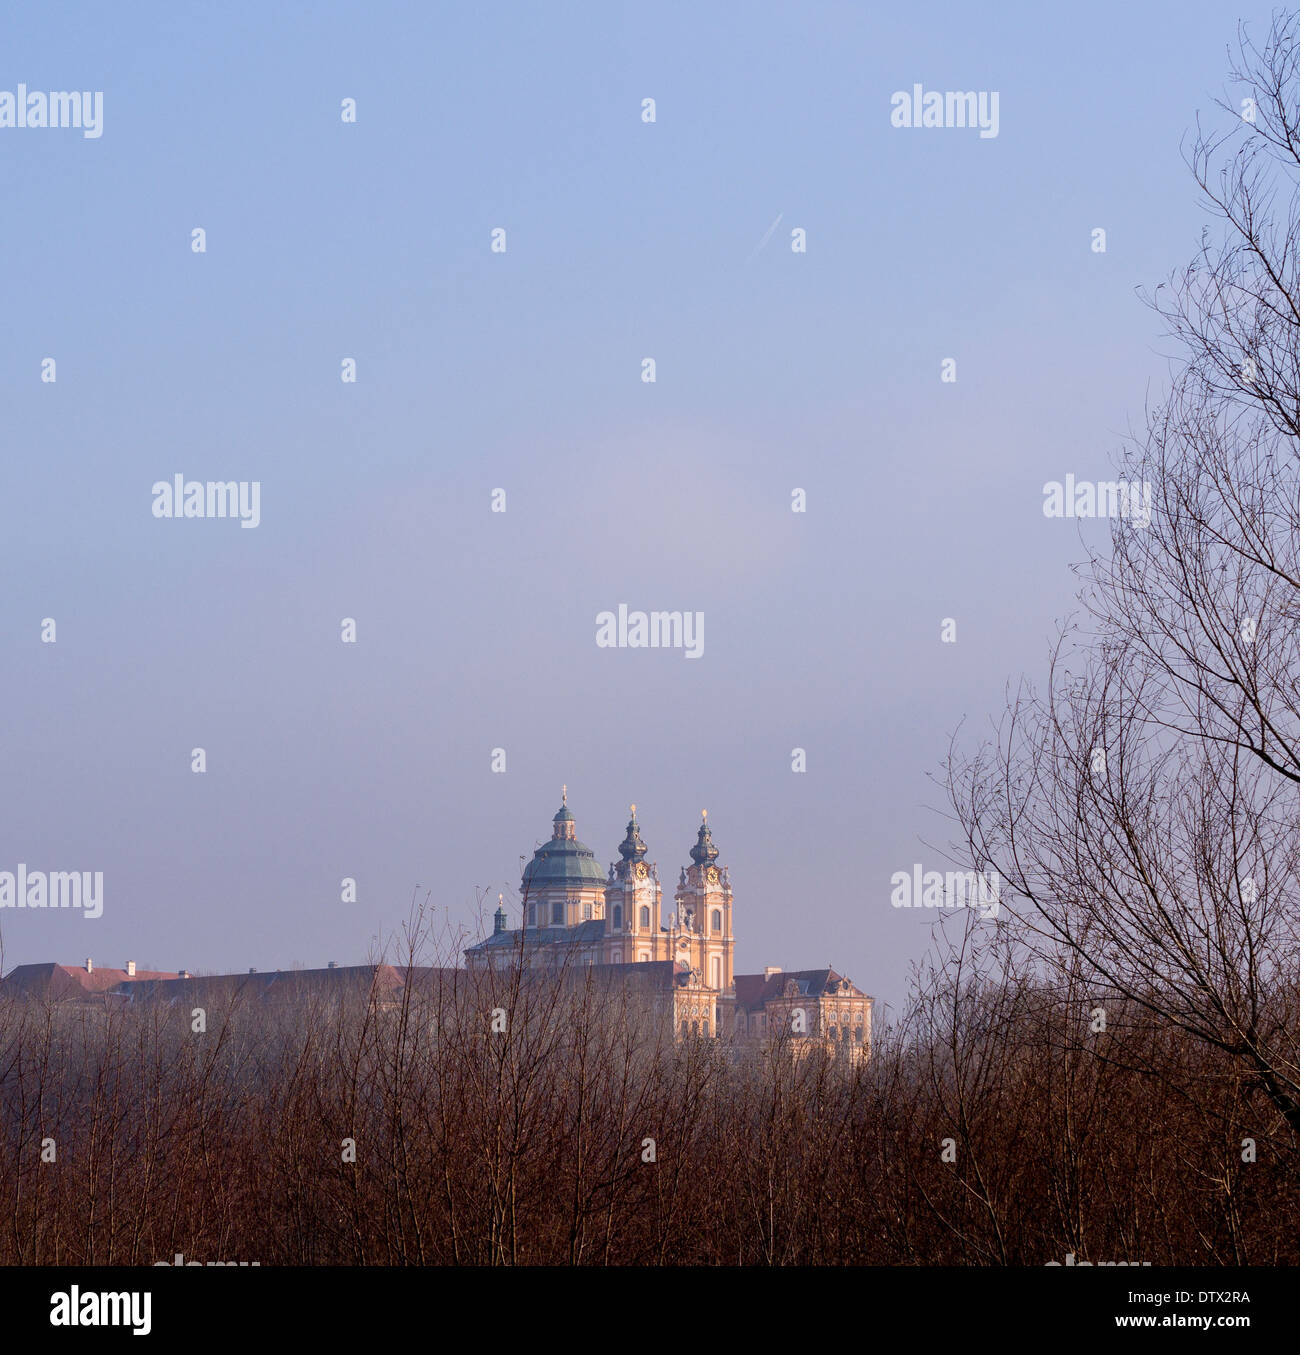 Melk Abbey monastery among the trees. Atop a high cliff the massive abbey floats above the trees that line the Danube River. Stock Photo